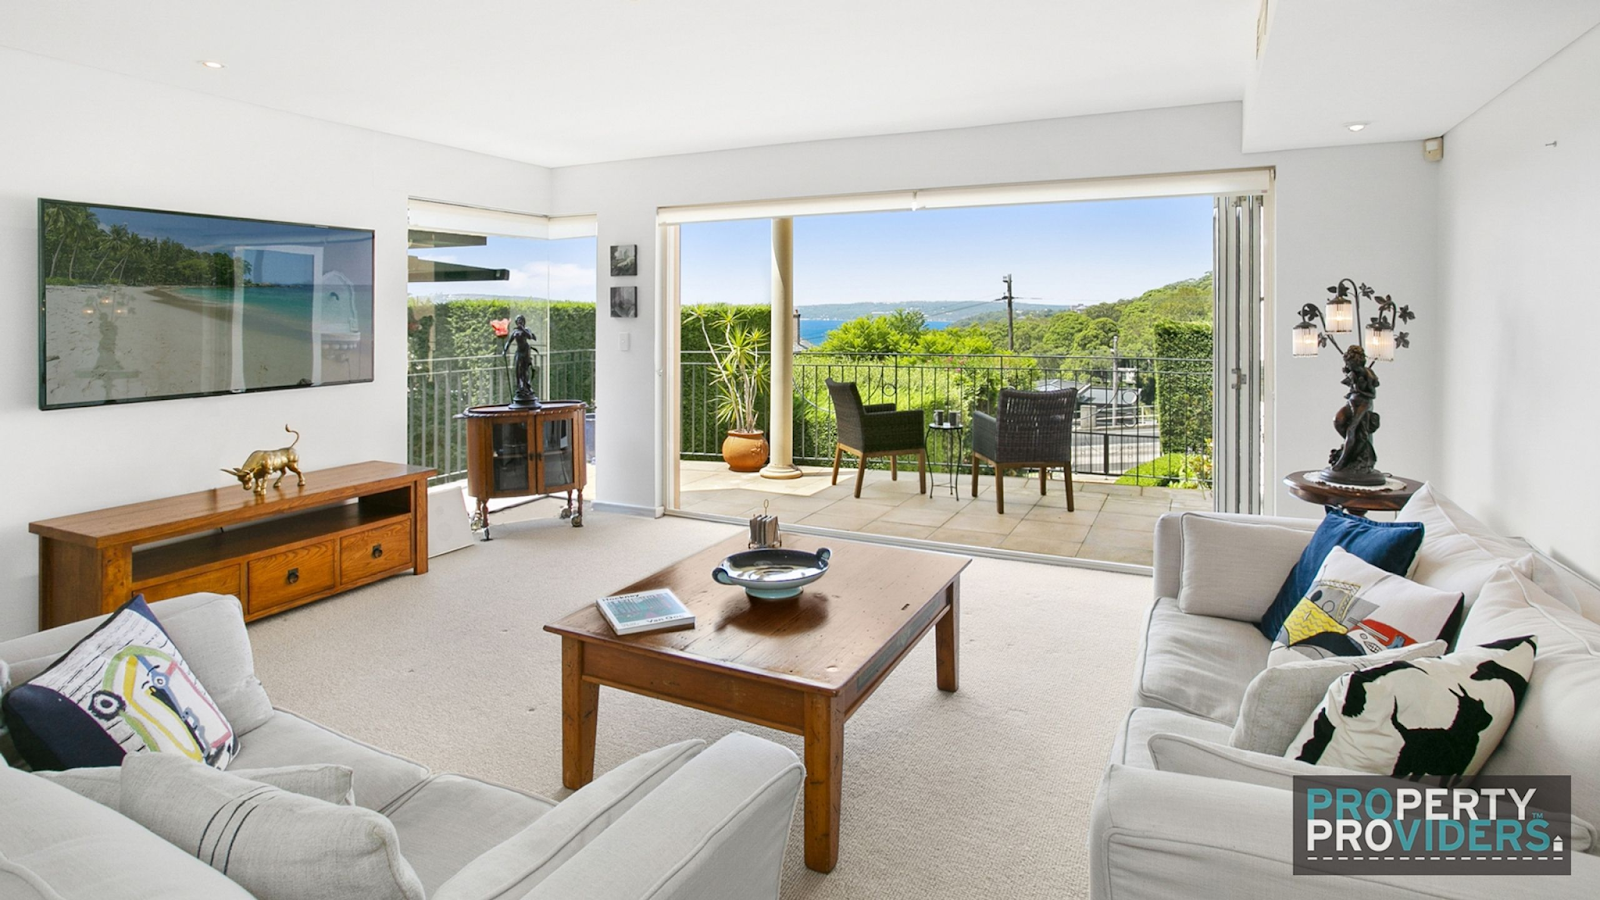 Skyline  is one of the finest pet-friendly homes in Mosman